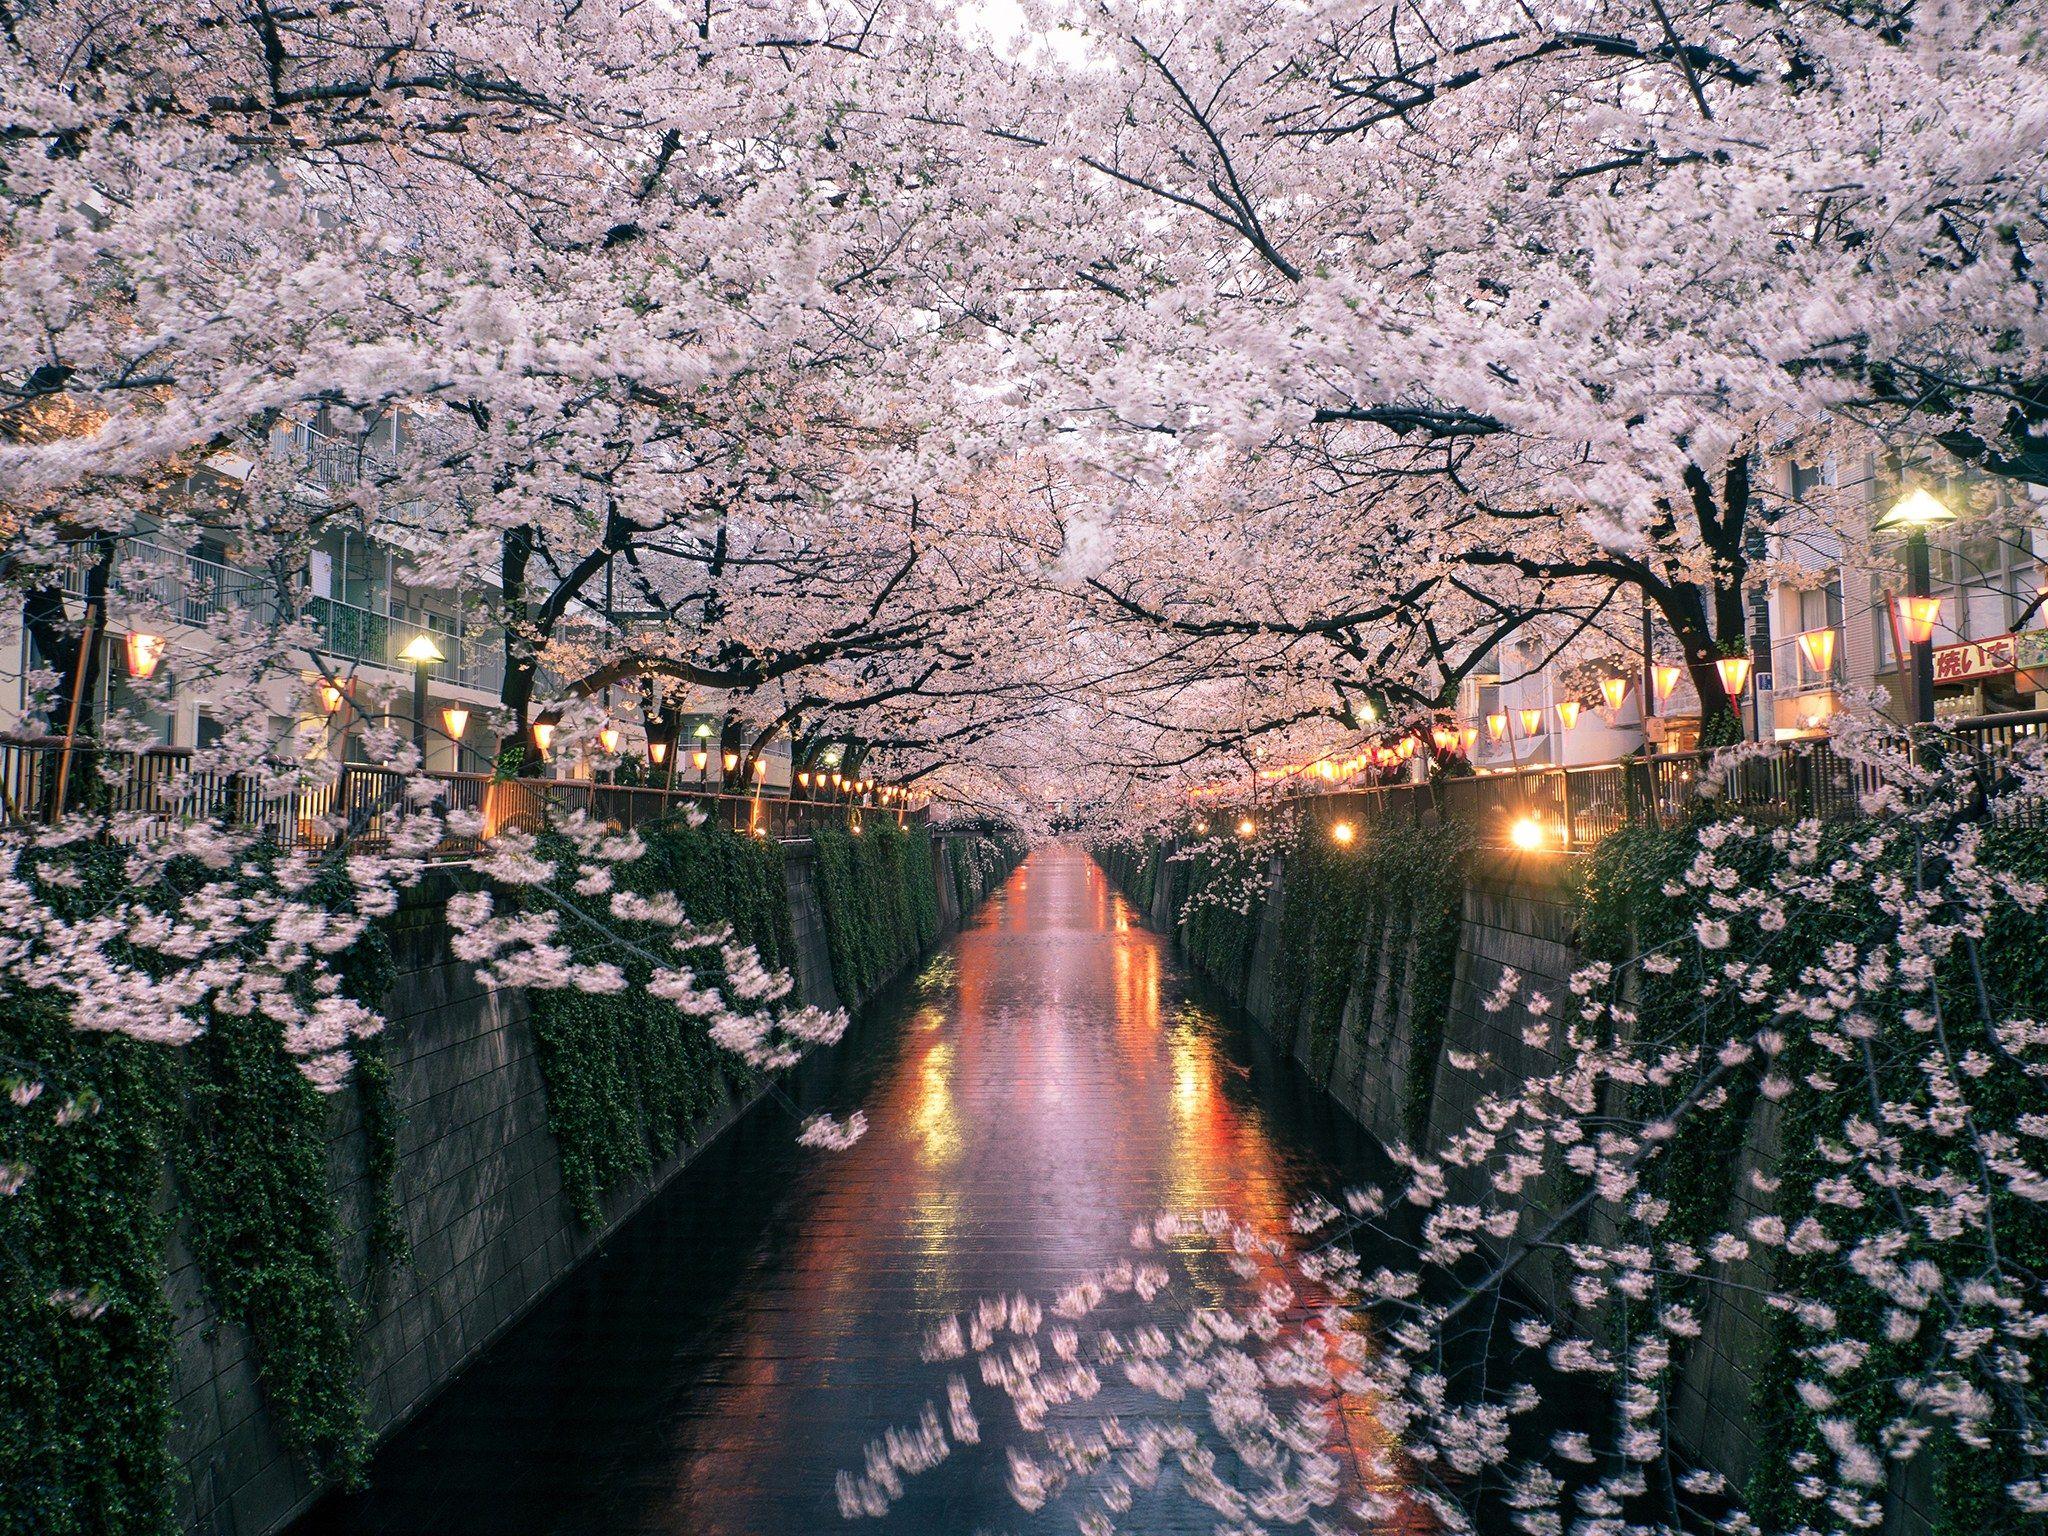 Download “The Beauty of Cherry Blossoms in Japan” Wallpaper